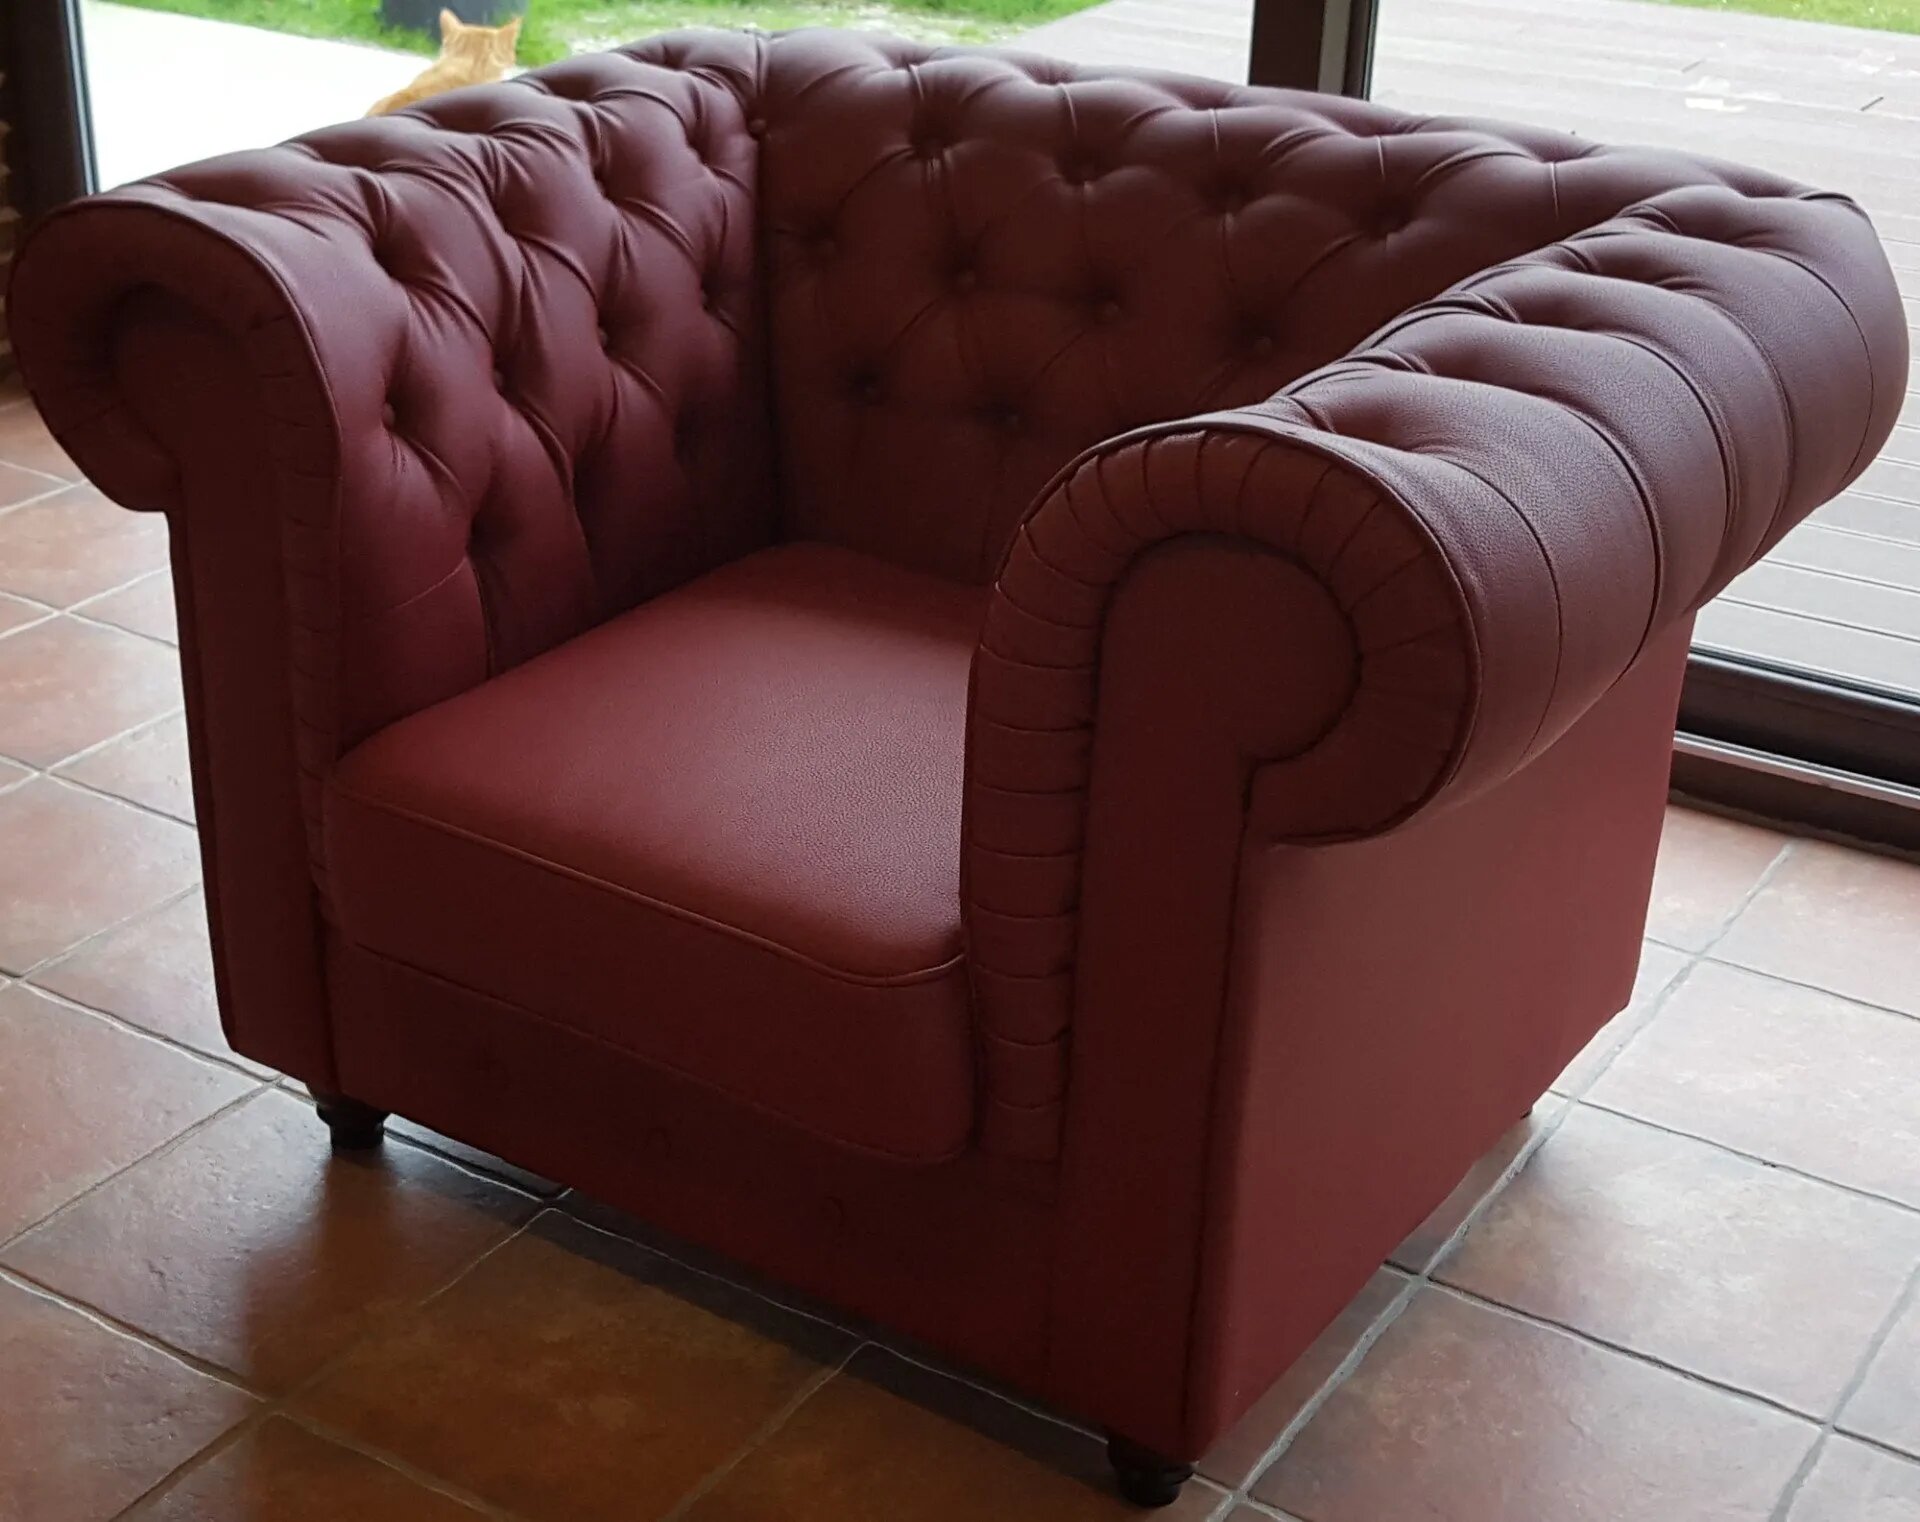 Leather Suite Recolouring Flawless Upholstery